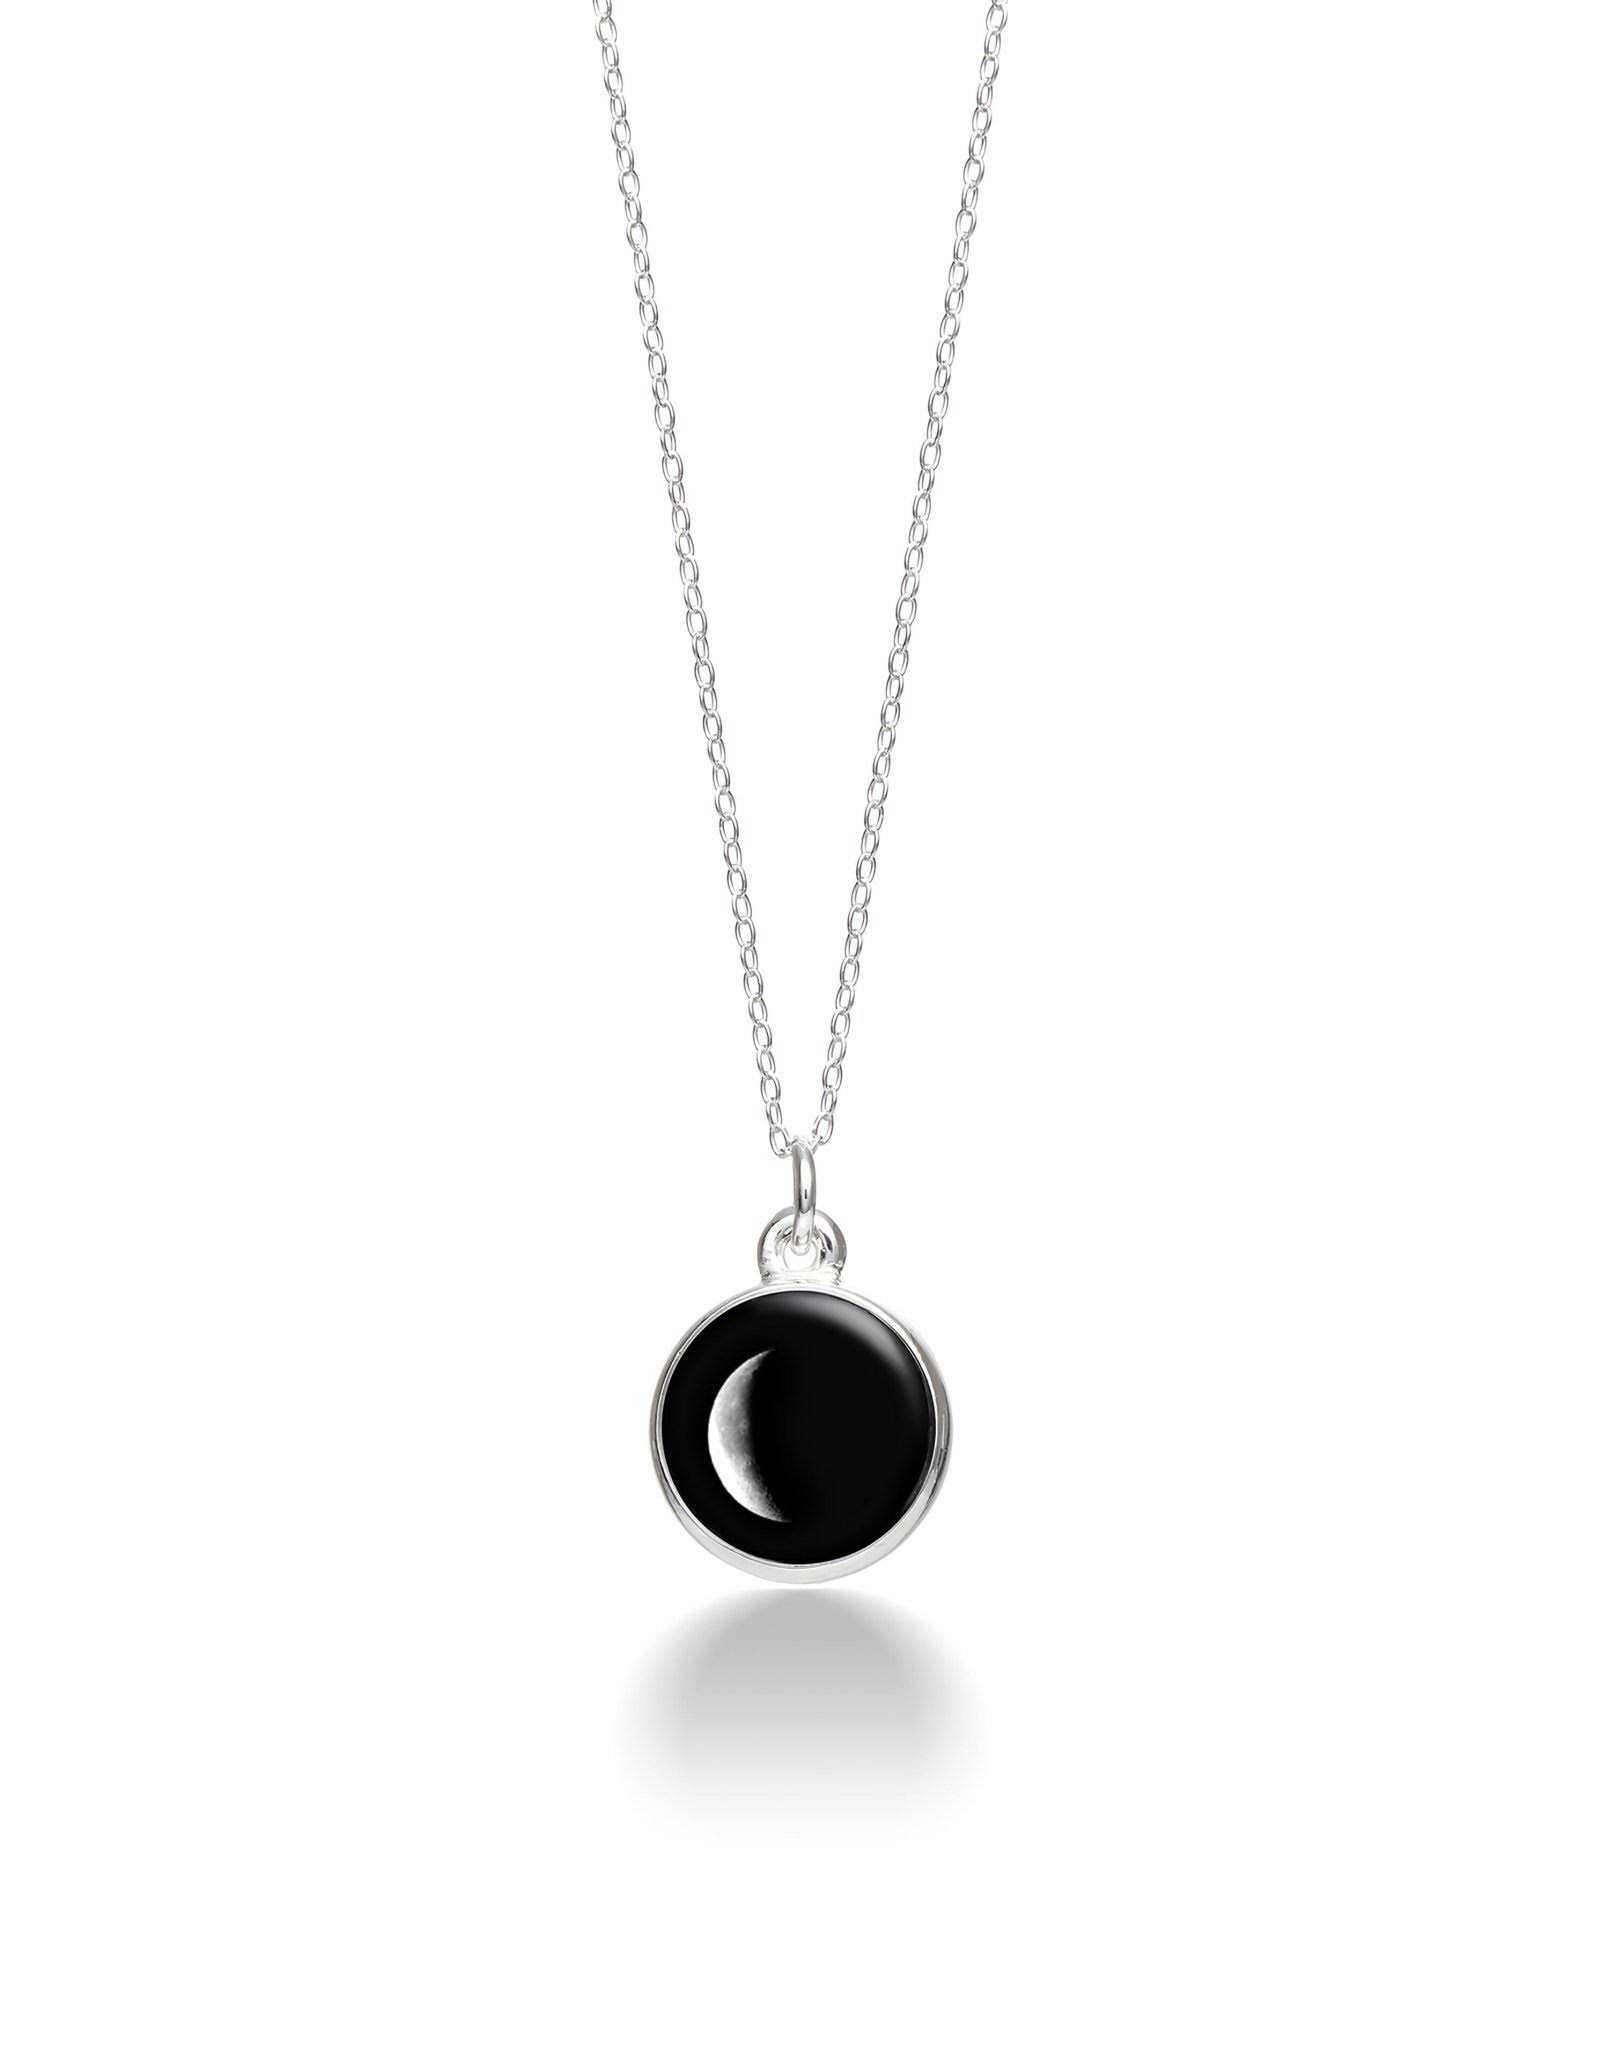 Moonglow - Charmed Simplicity Necklace (1D) One Size